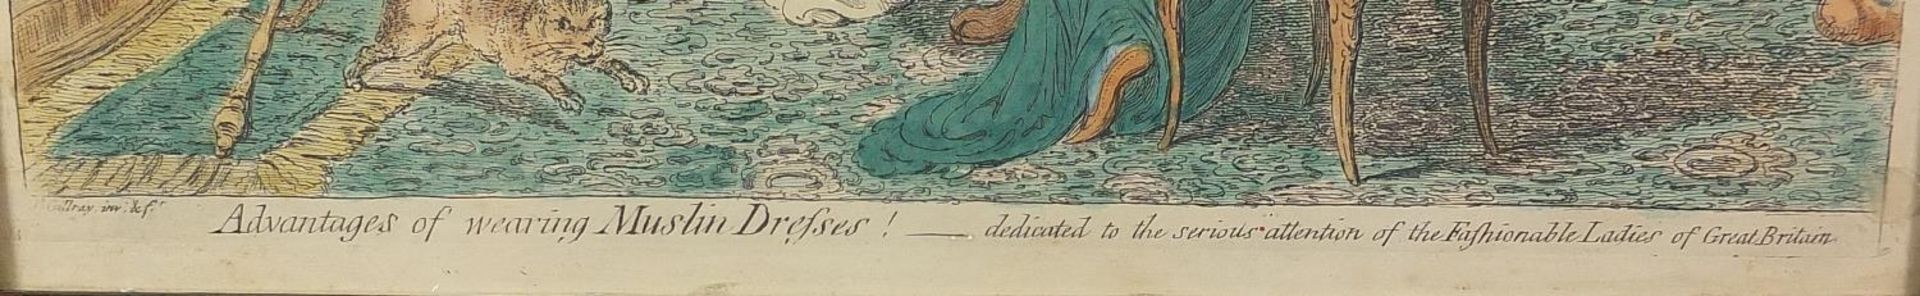 After James Gillray - Advantages of Wearing Muslin Dresses, dedicated to the serious attention of - Image 4 of 5